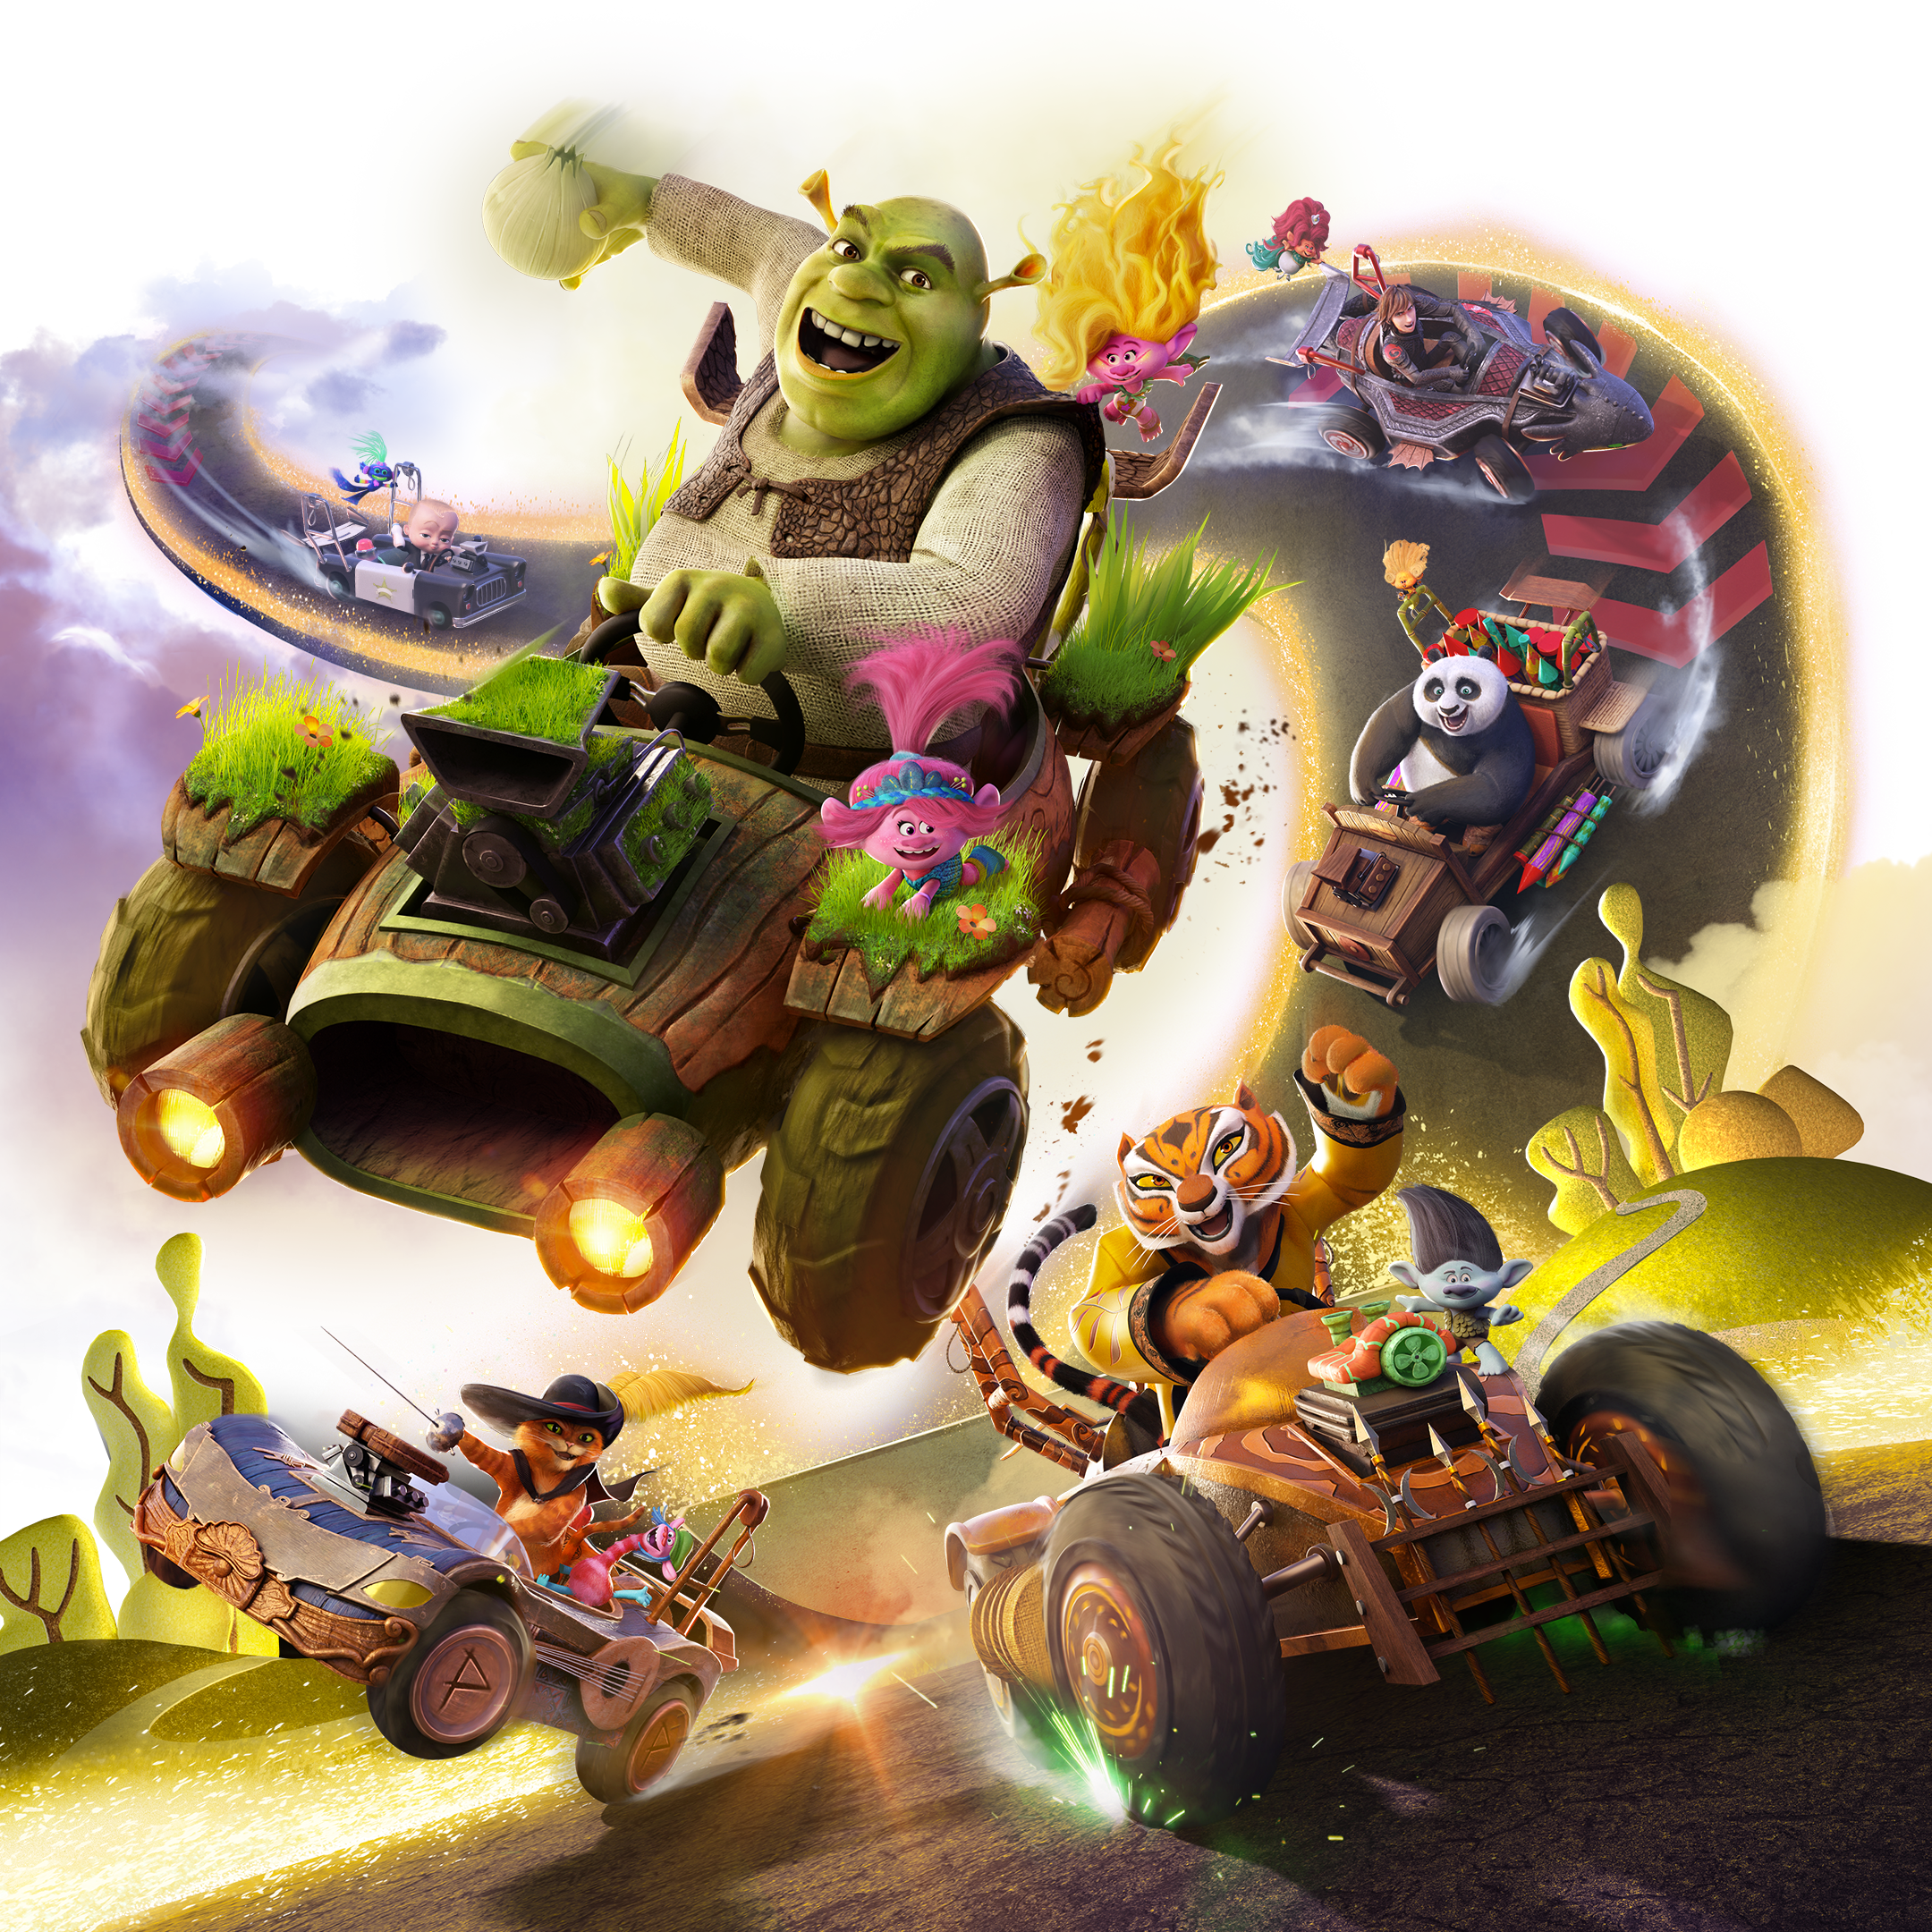 DreamWorks All-Star Kart Racing announced for PS5, Xbox Series